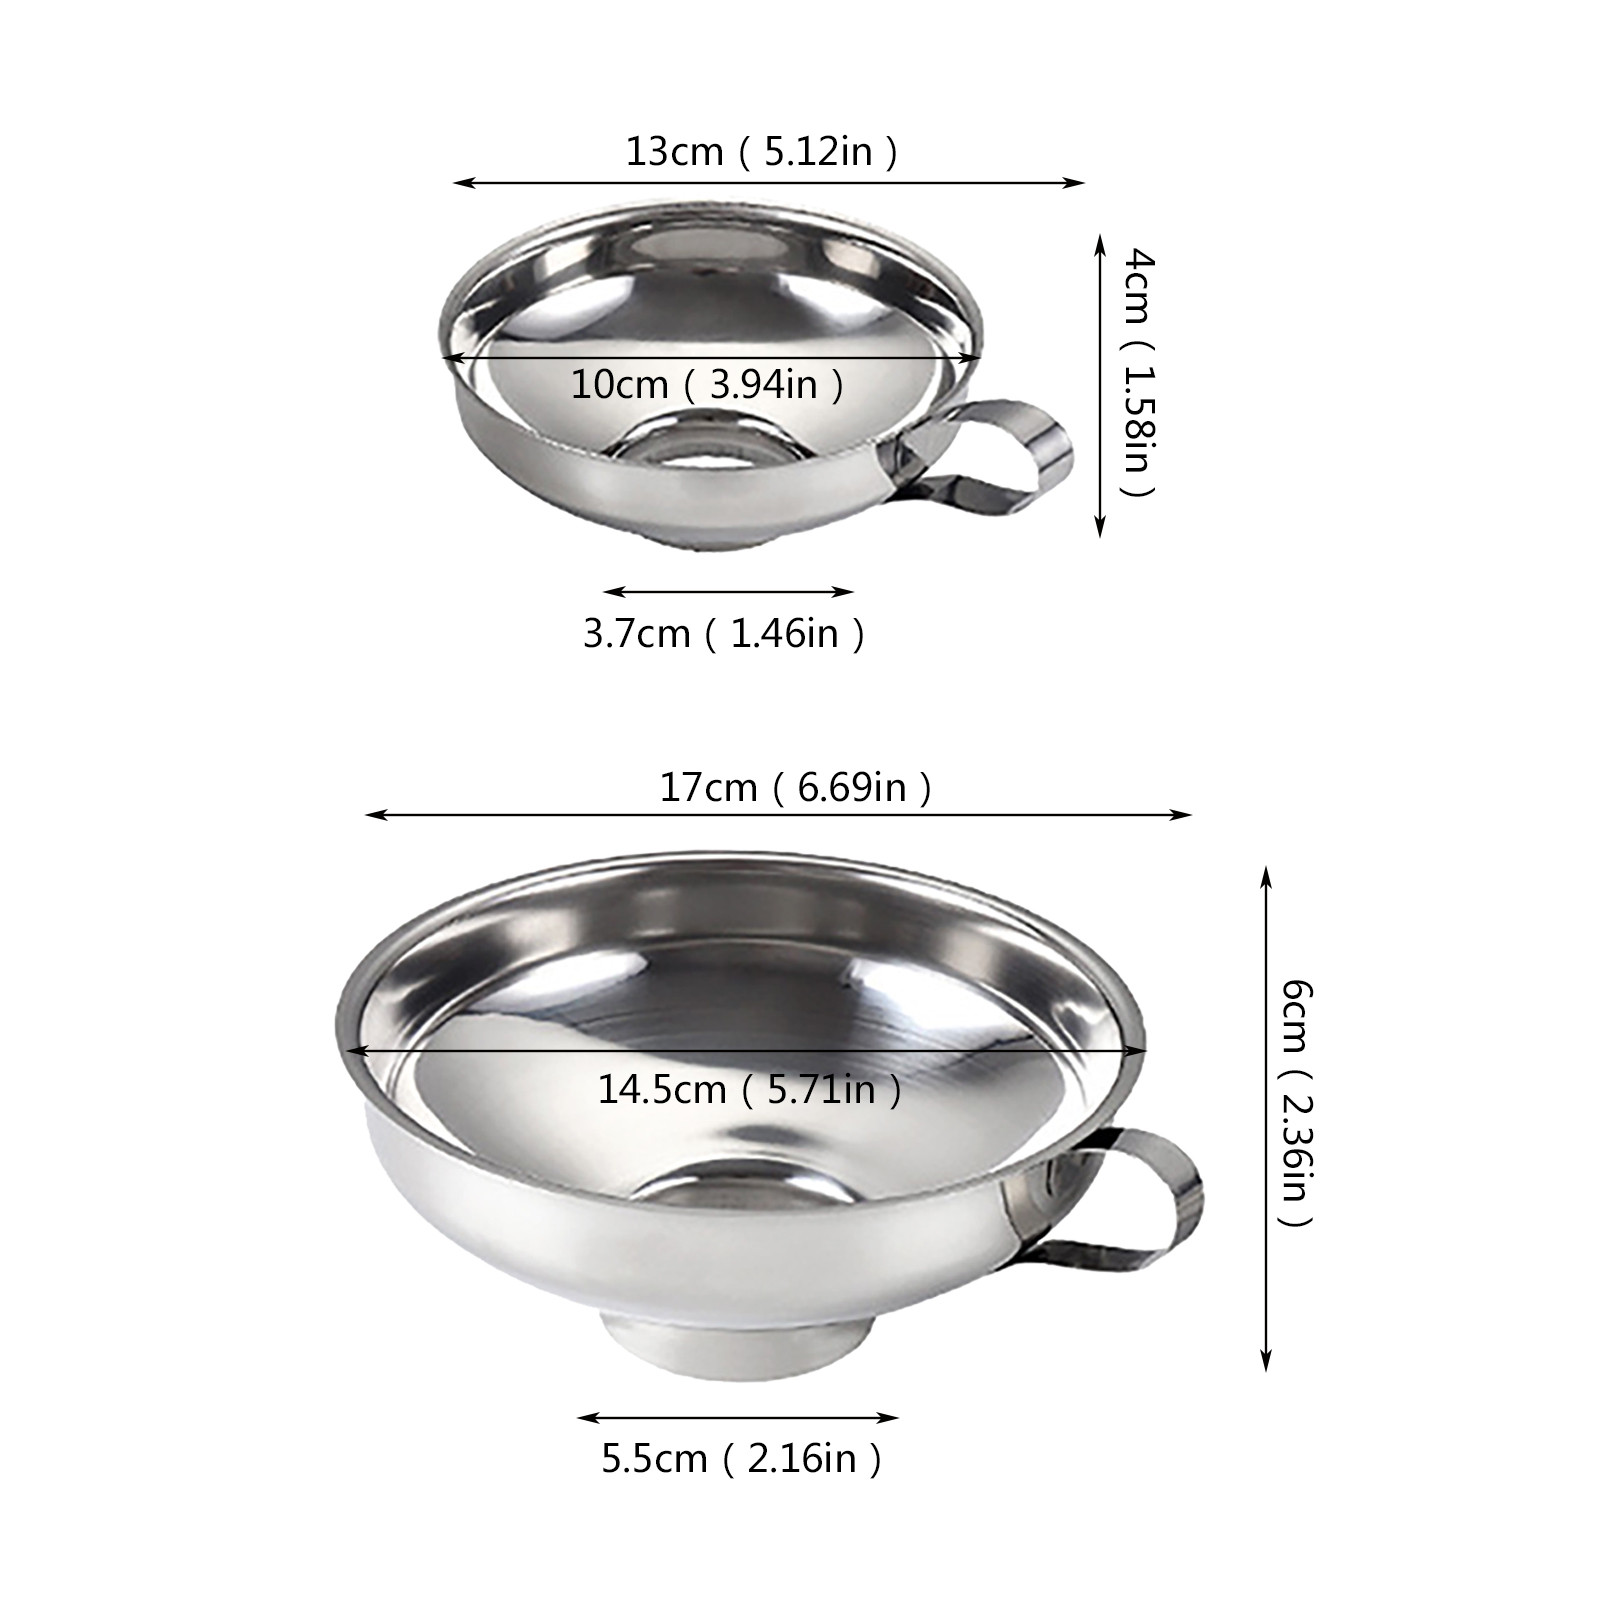 WANYNG Stainless Steel Canning Funnel Wide Mouth Wide Mouth Jar Funnel With Handle For Wide Mouth And Regular Mouth Wide Mouth Jars Food Grade Metal Jam Funnel - image 2 of 4